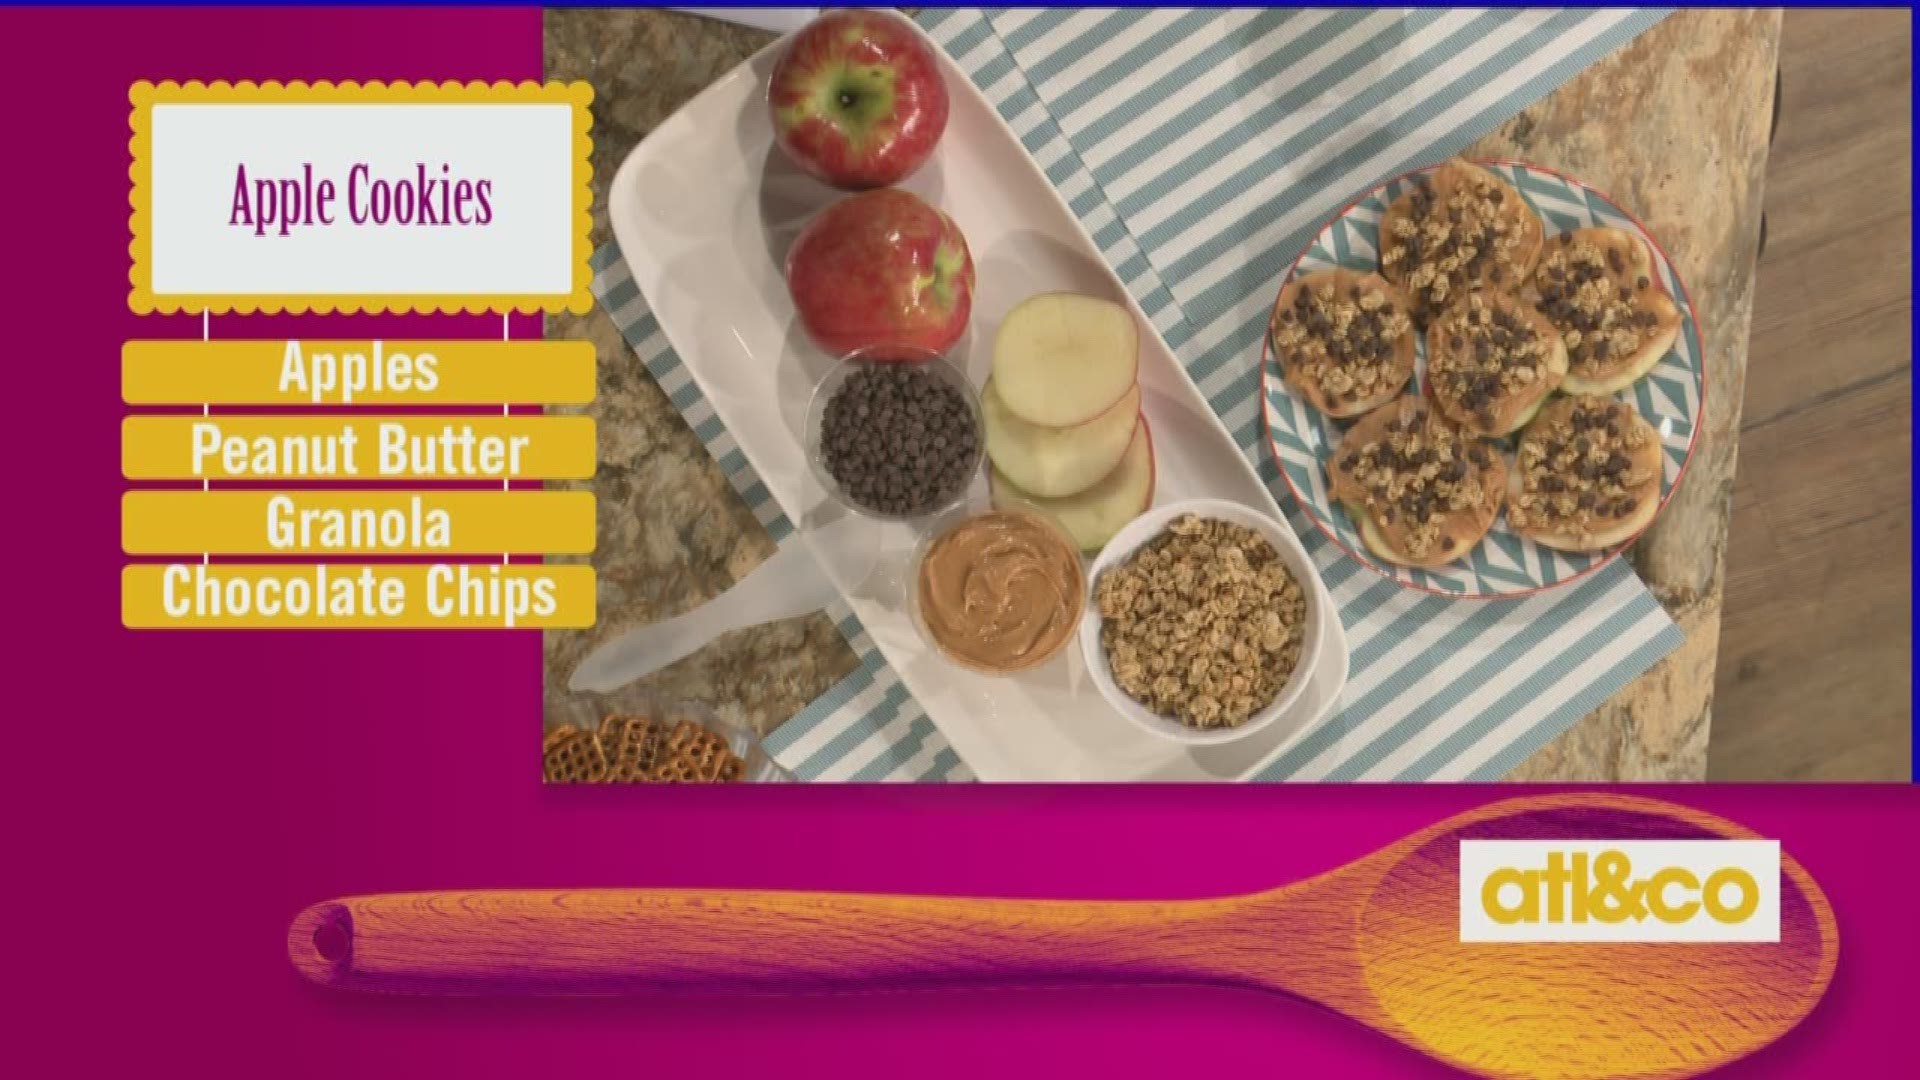 Get quick and healthy after-school snacks from Sumptuous Living's Mandy Landefeld that'll keep your on-the-go kids satisfied!